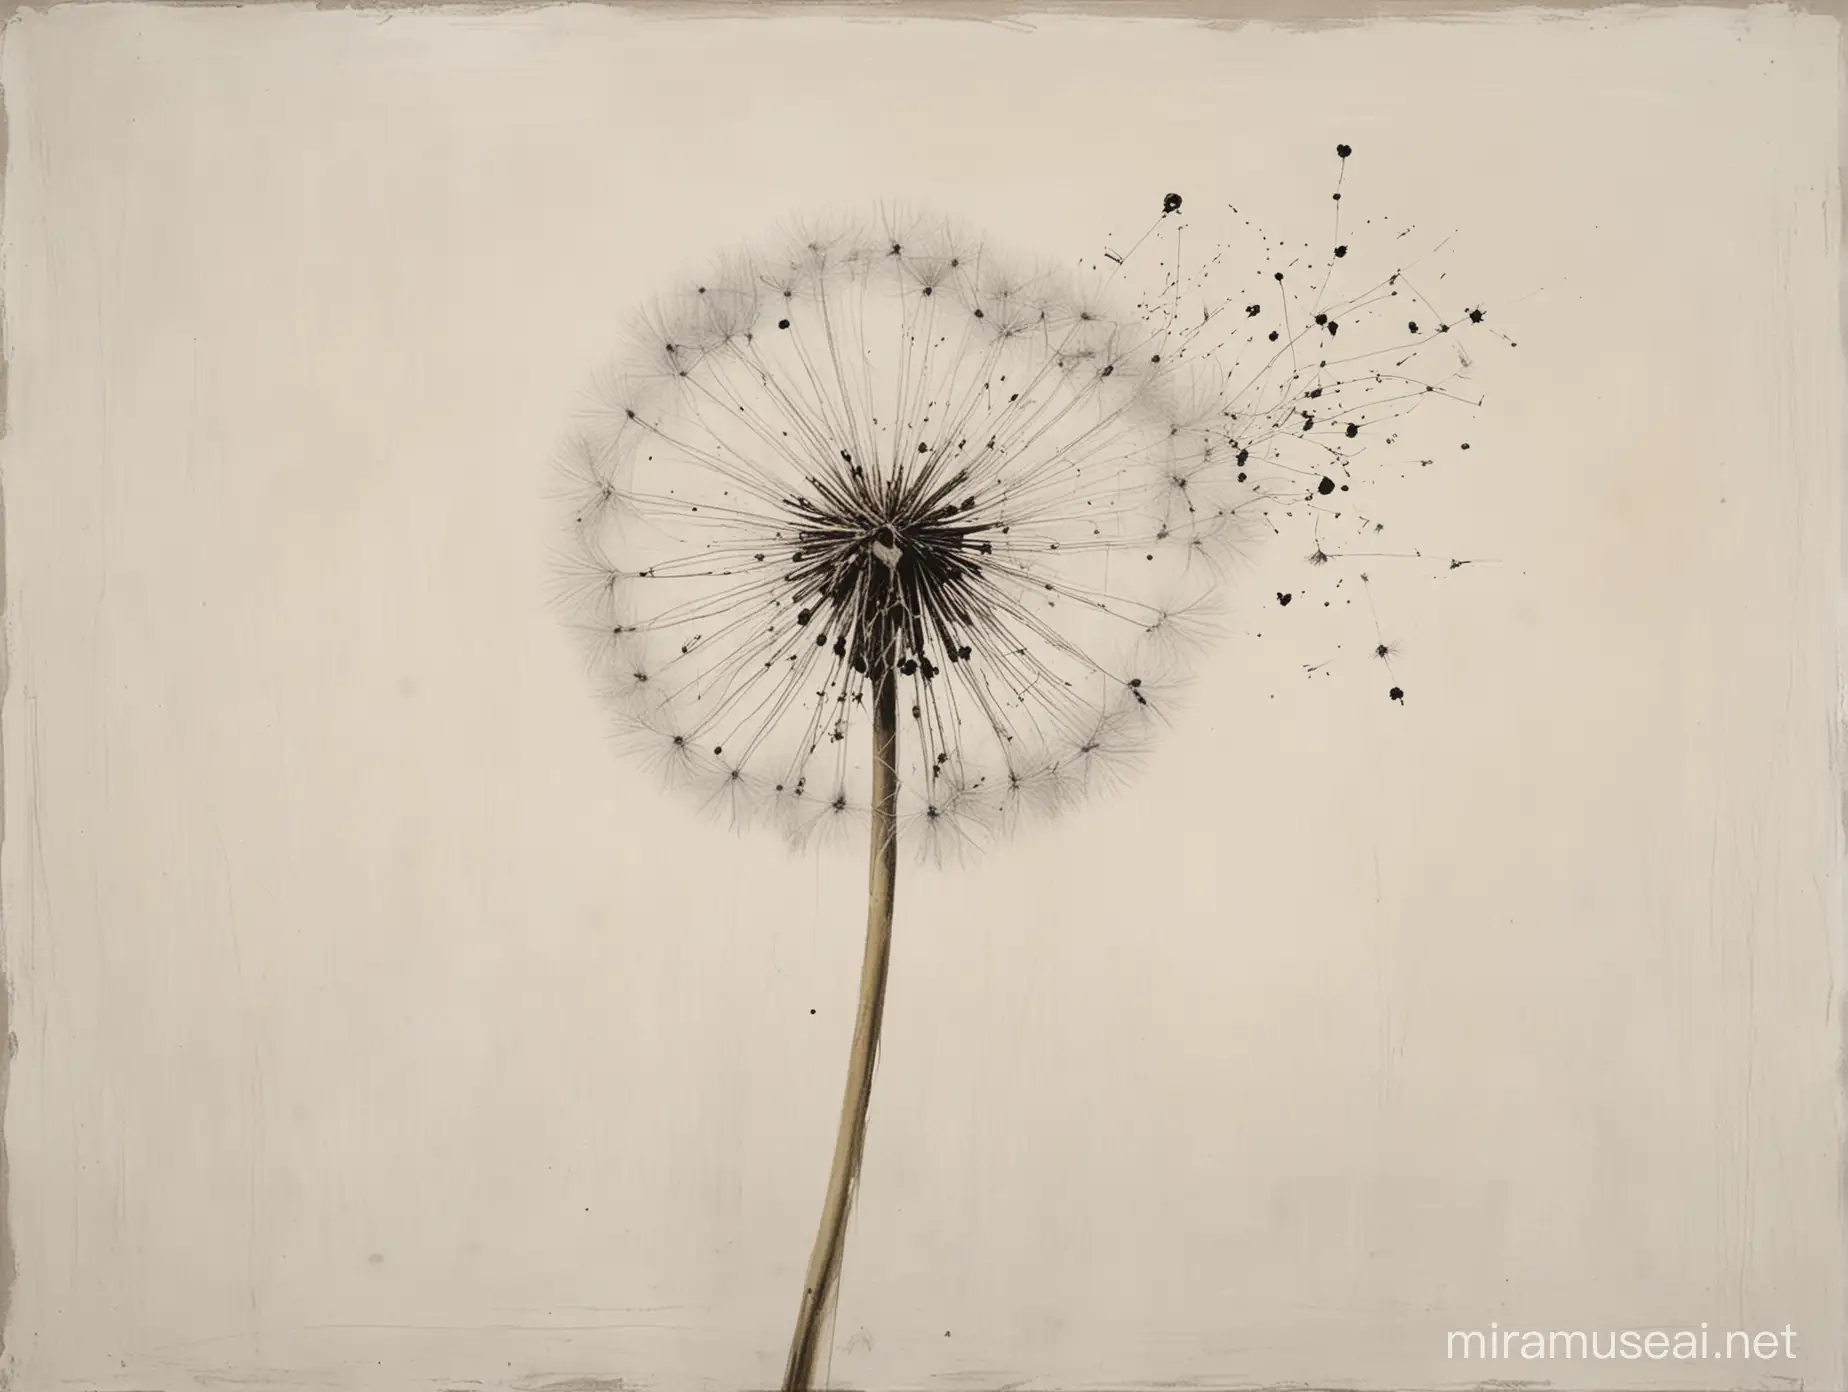 Abstract Dandelion Painting Minimalist Art with Blowing Seeds